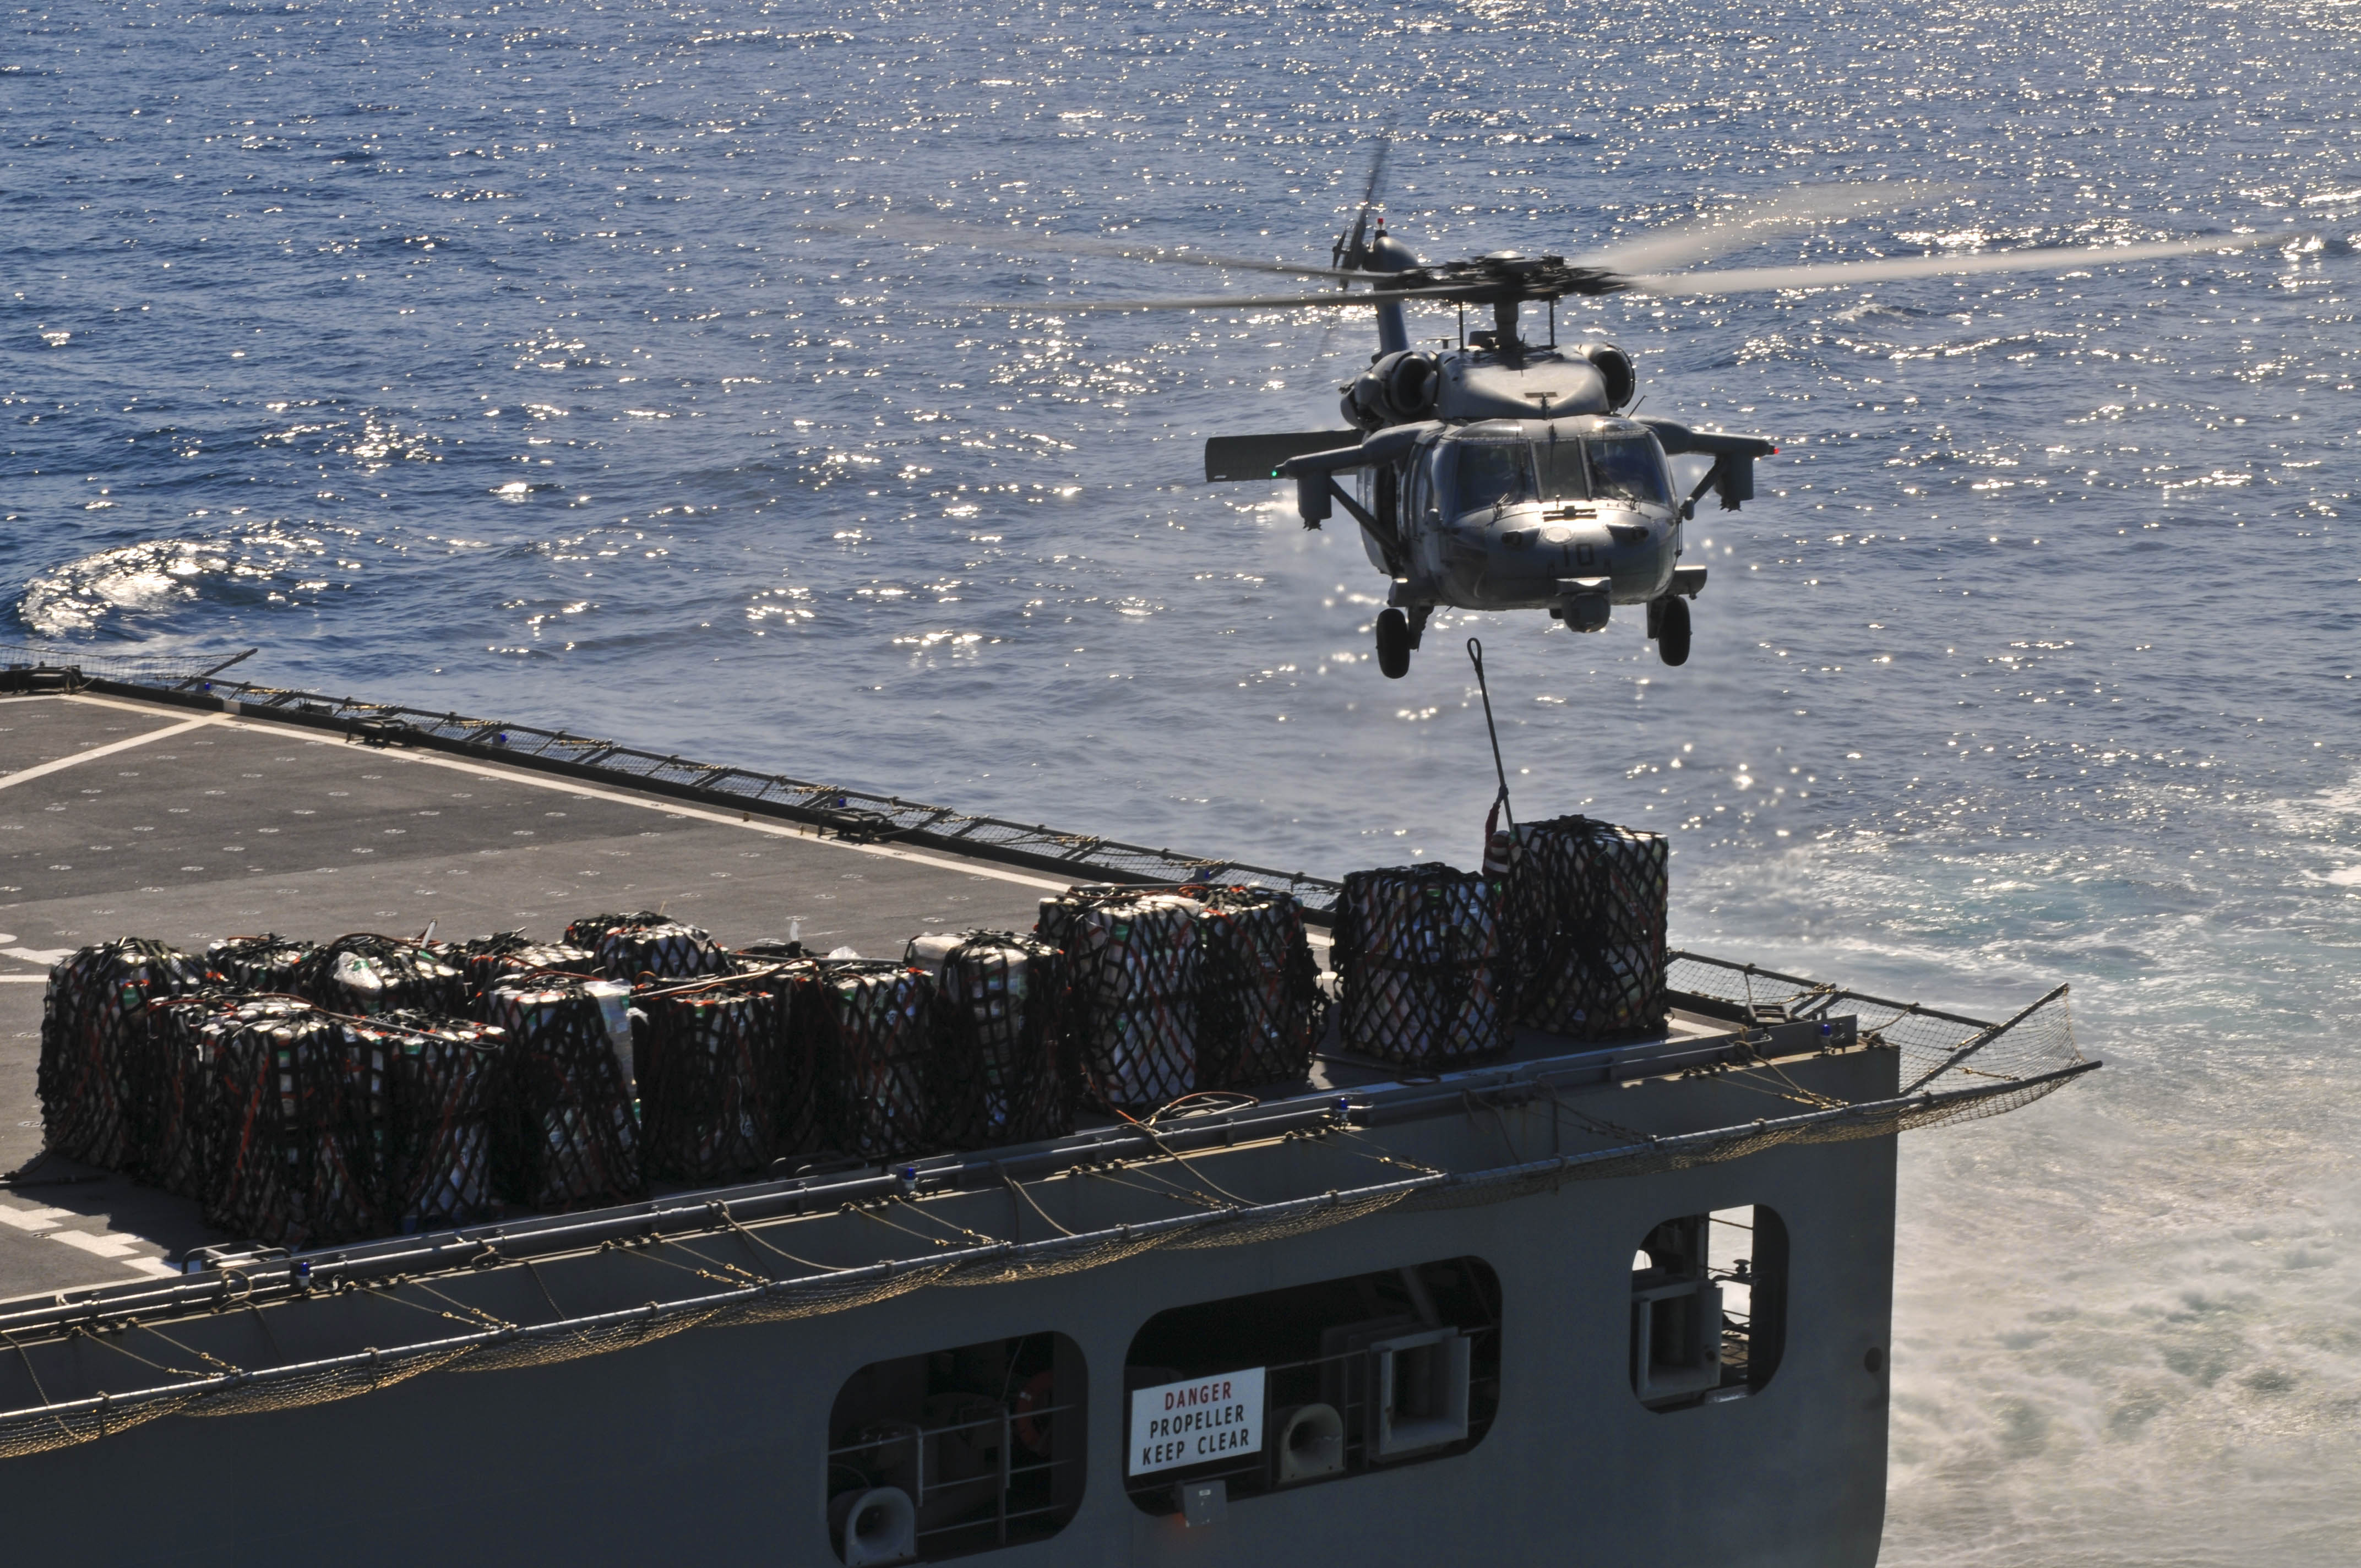 US Navy 110403-N-9950J-278 An MH-60S Sea Hawk helicopter picks up supplies from USNS Matthew Perry (T-AKE 9) during a vertical replenishment